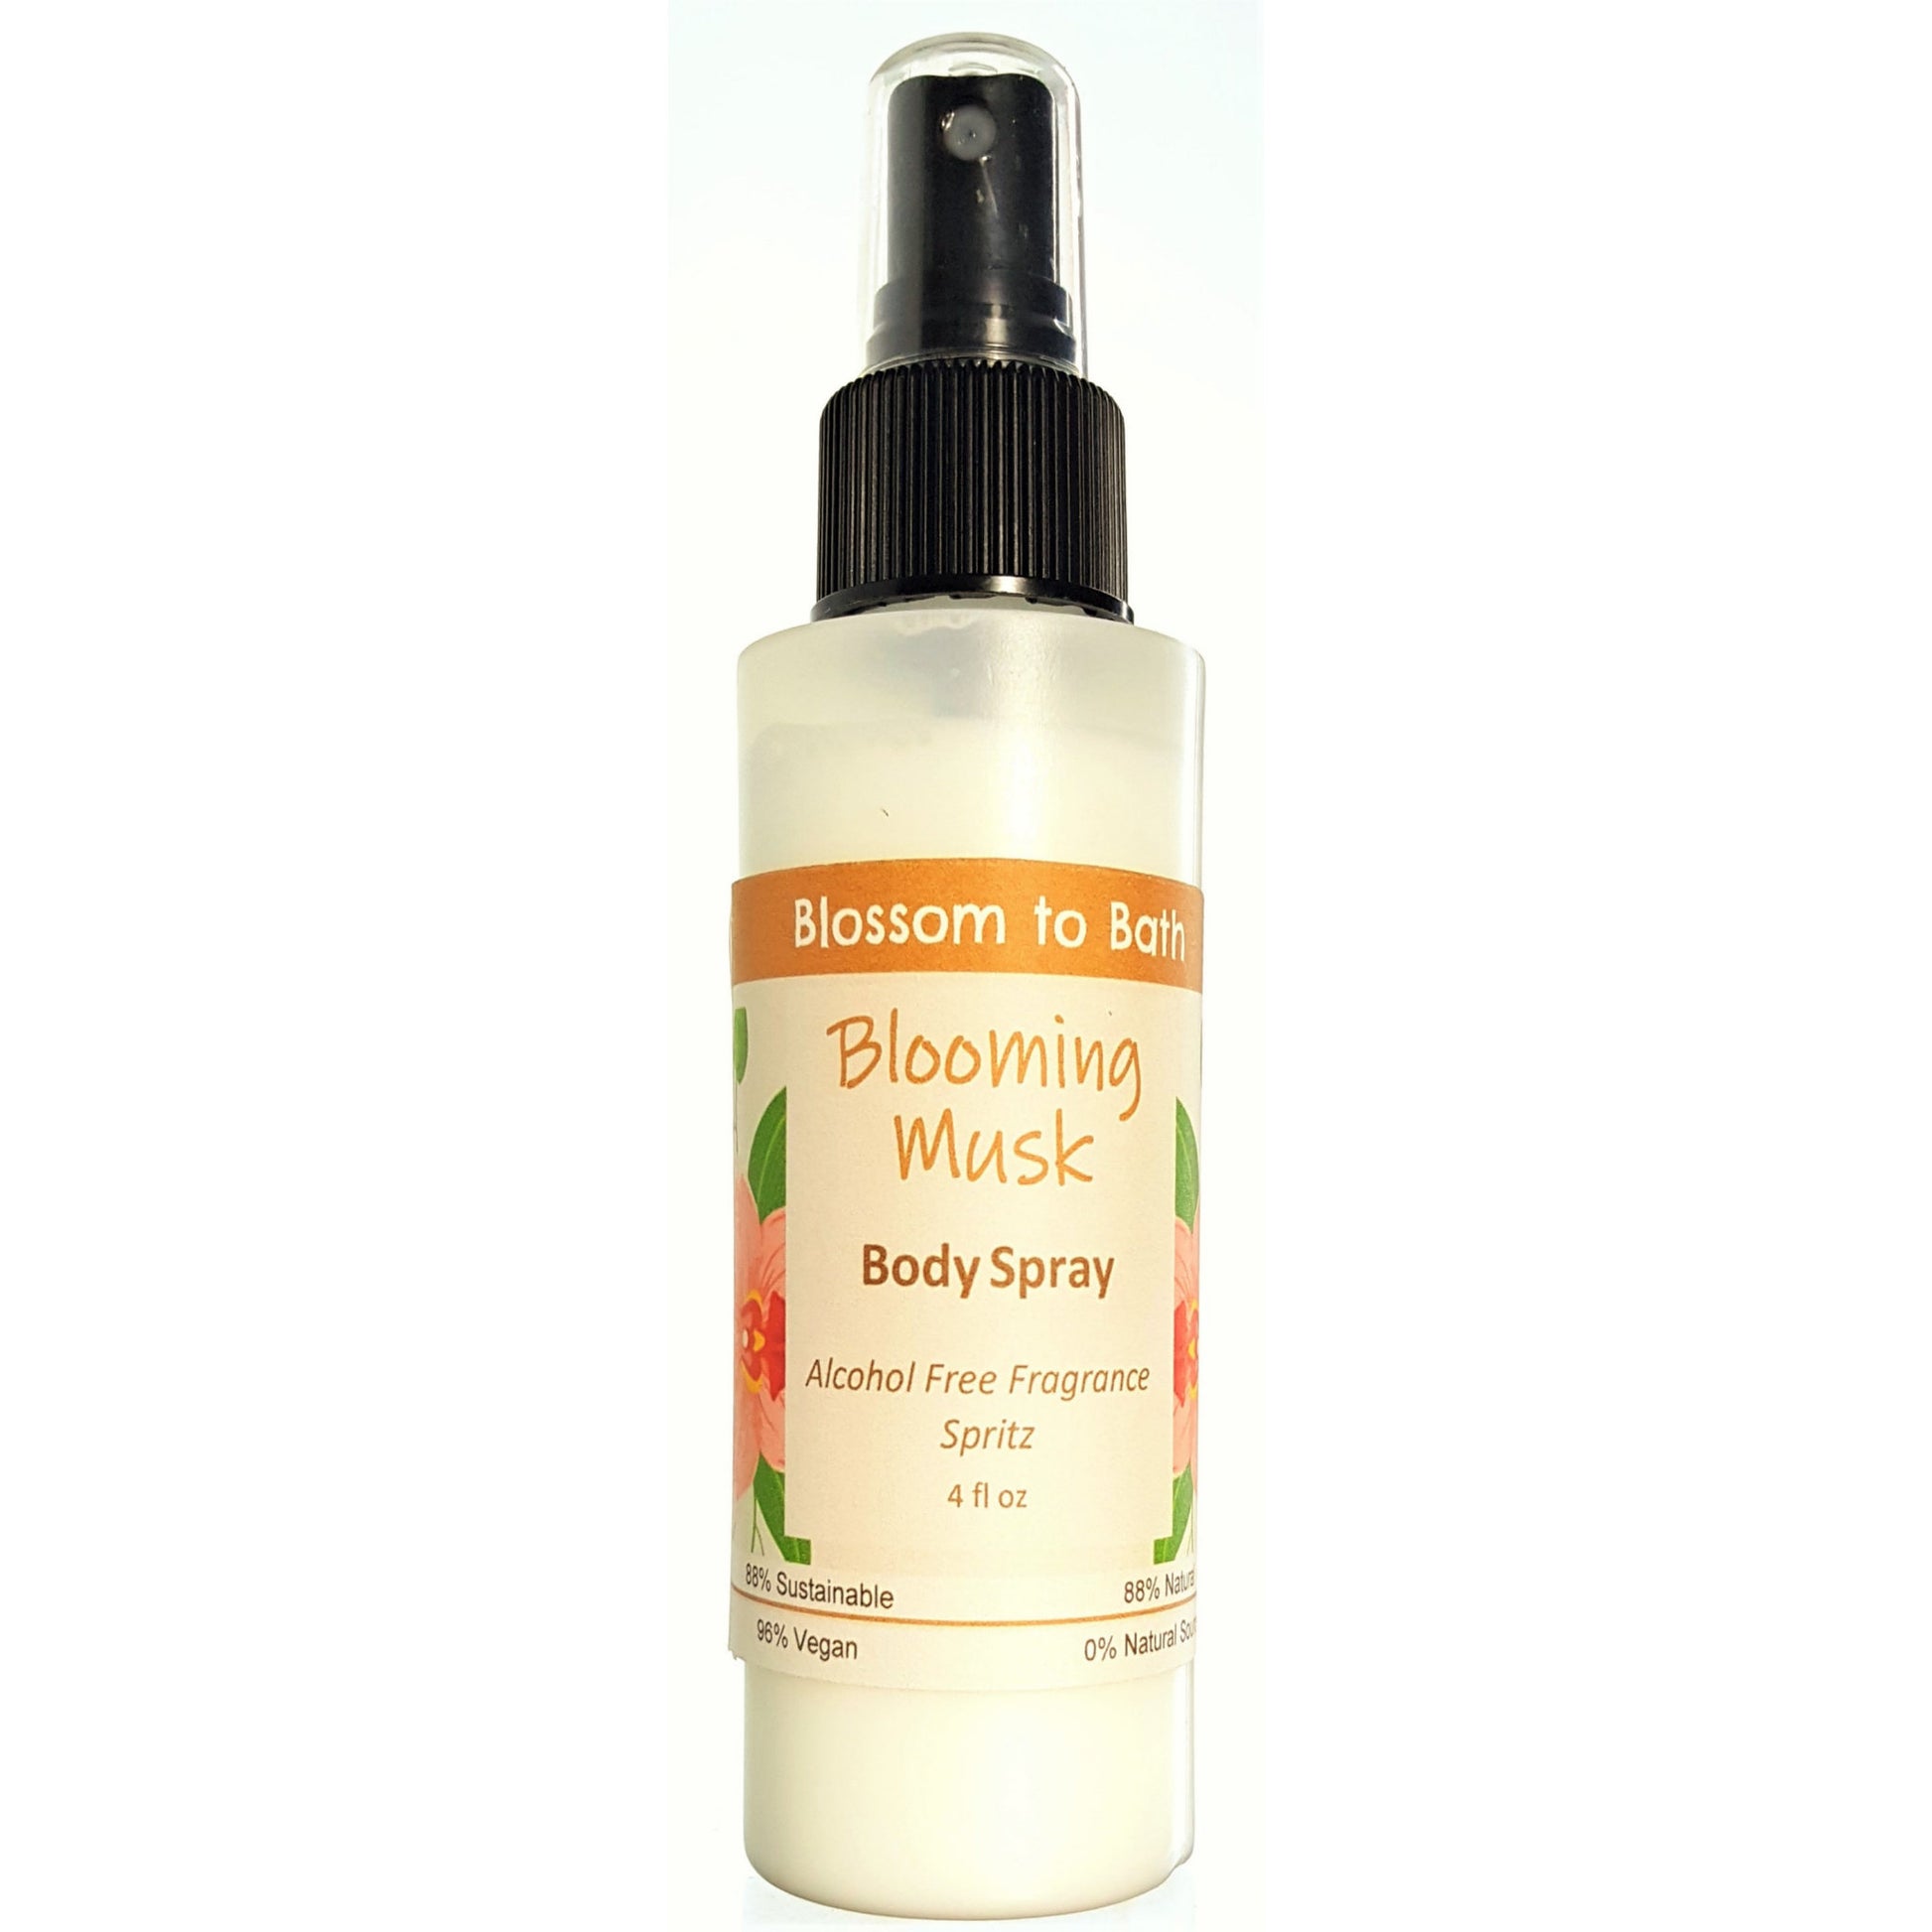 Buy Blossom to Bath Blooming Musk Body Spray from Flowersong Soap Studio.  Natural  freshening of skin, linens, or air  A sensual floral and musk scent that is subtle and feminine.